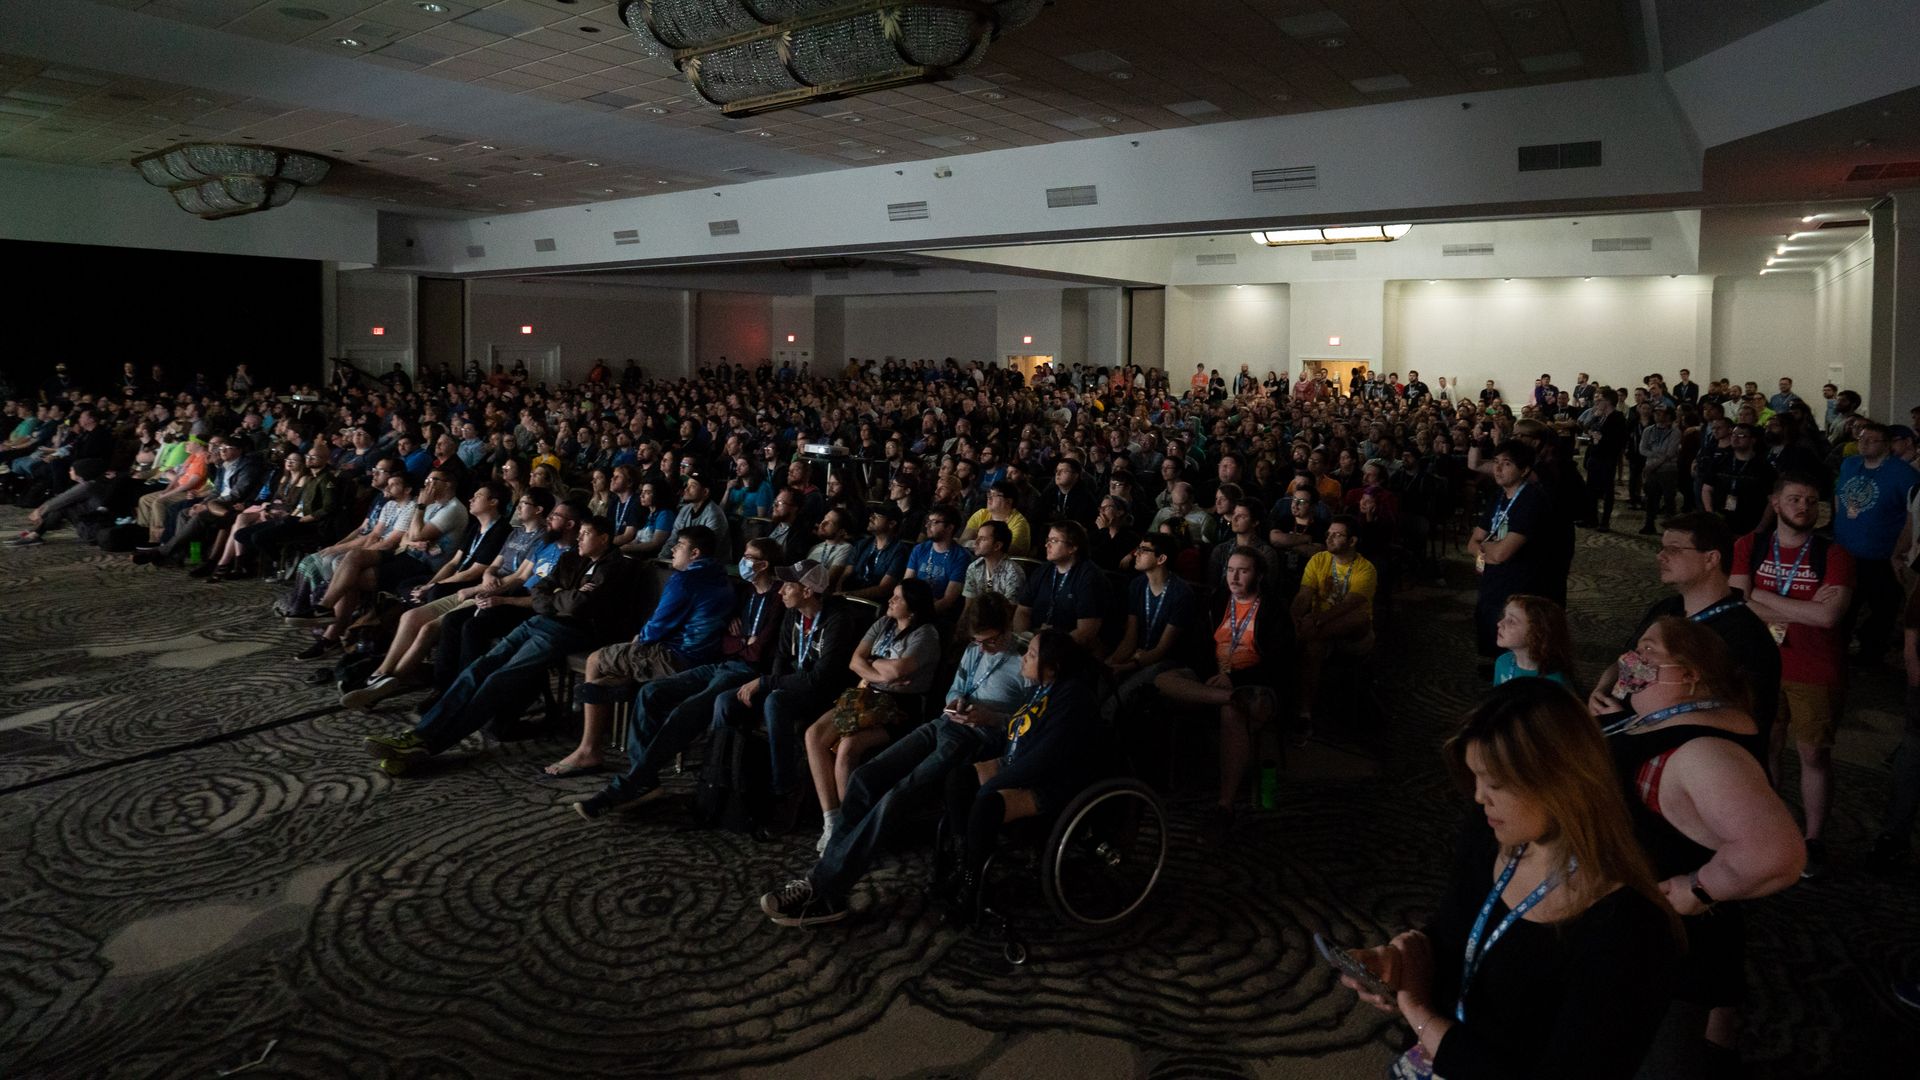 The AGDQ event in Orlando in 2020. Photo: Games Done Quick